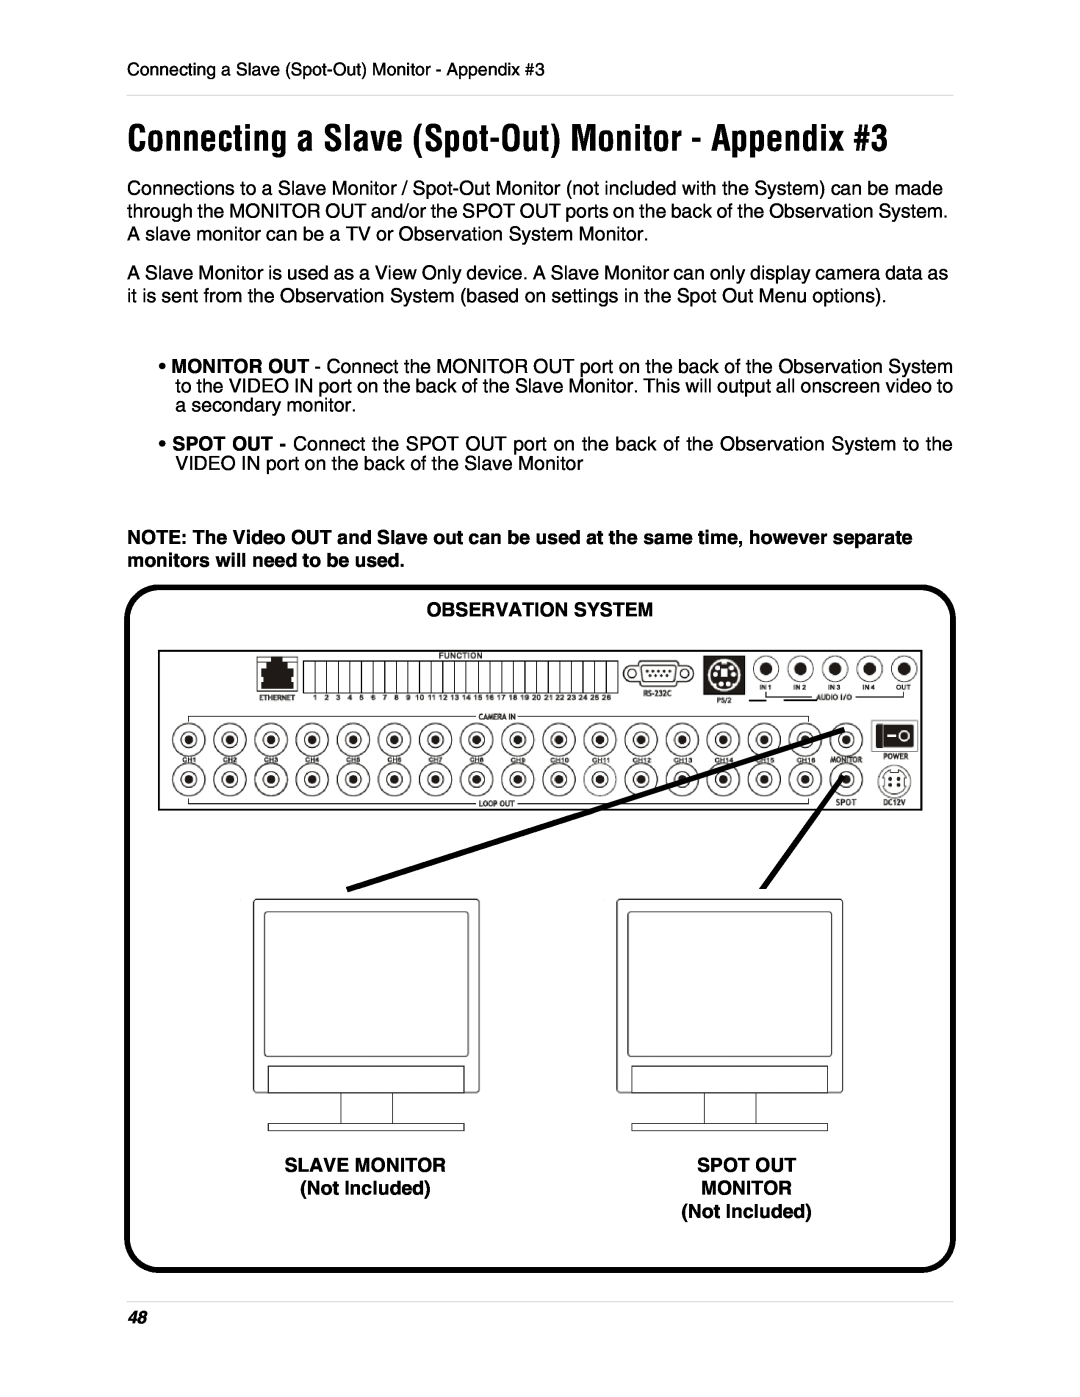 LOREX Technology L19lD1616501 instruction manual Connecting a Slave Spot-OutMonitor - Appendix #3, Observation System 